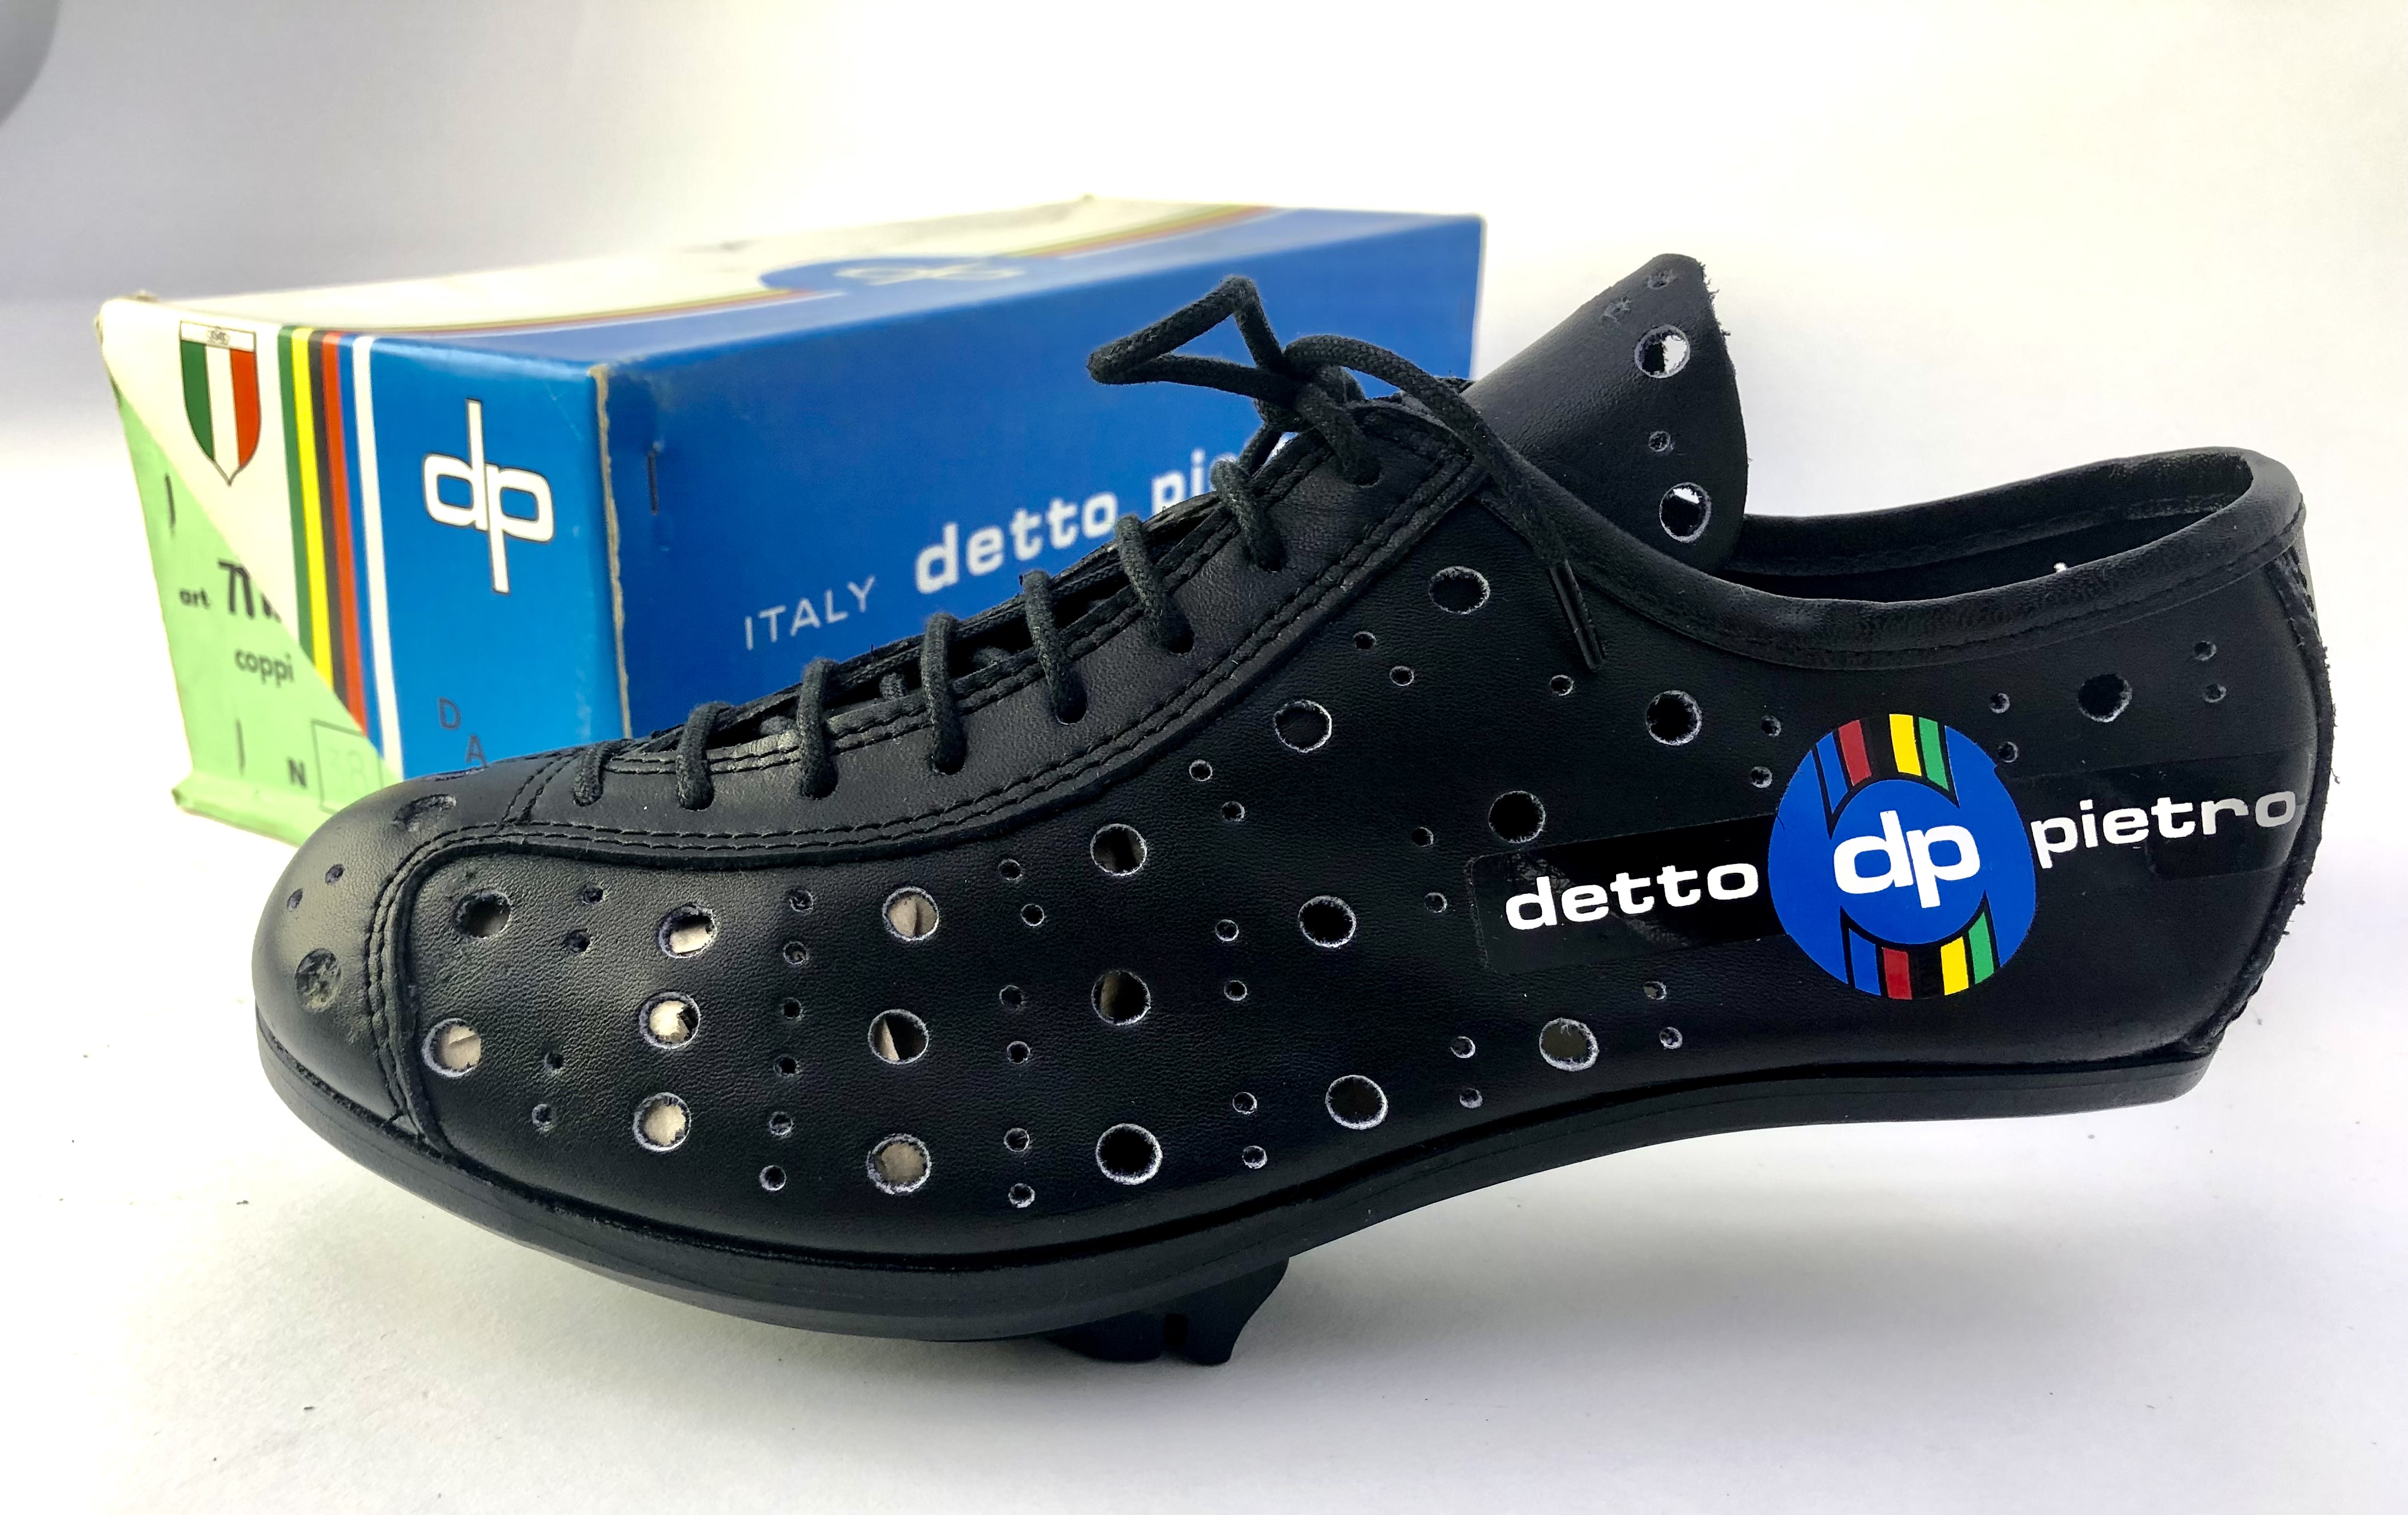 NOS Vintage Detto Pietro 7 TAR coppi Cycling Shoes Size 37